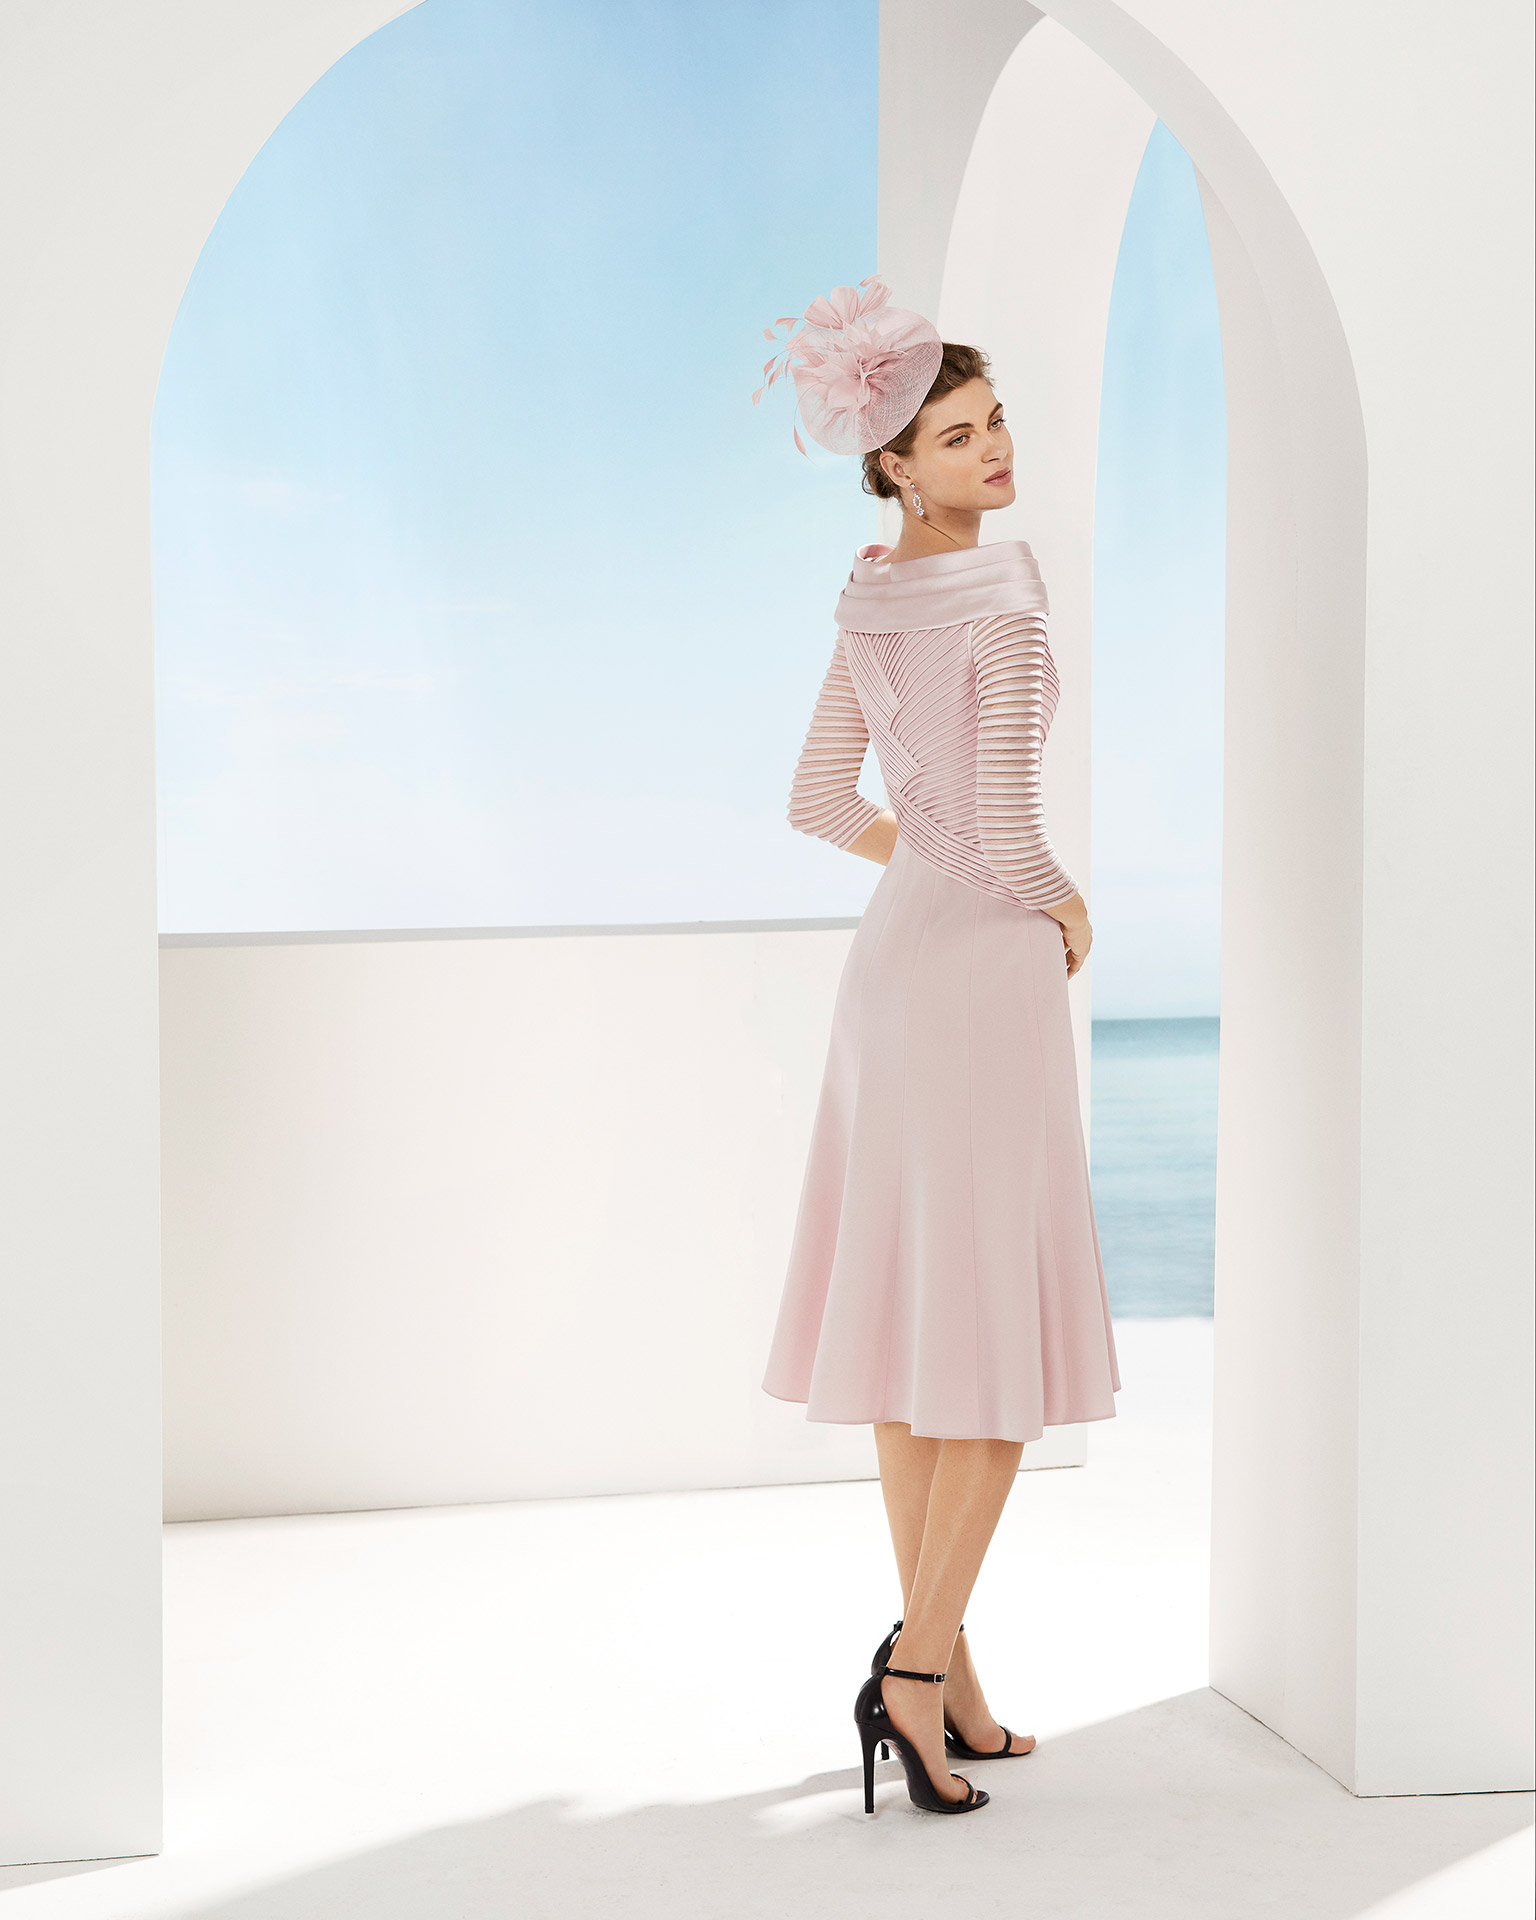 Short cocktail dress with With draped bodice, off-the-shoulder neckline and three-quarter sleeves. Available in beige and pink. 2020 COUTURE CLUB Collection.